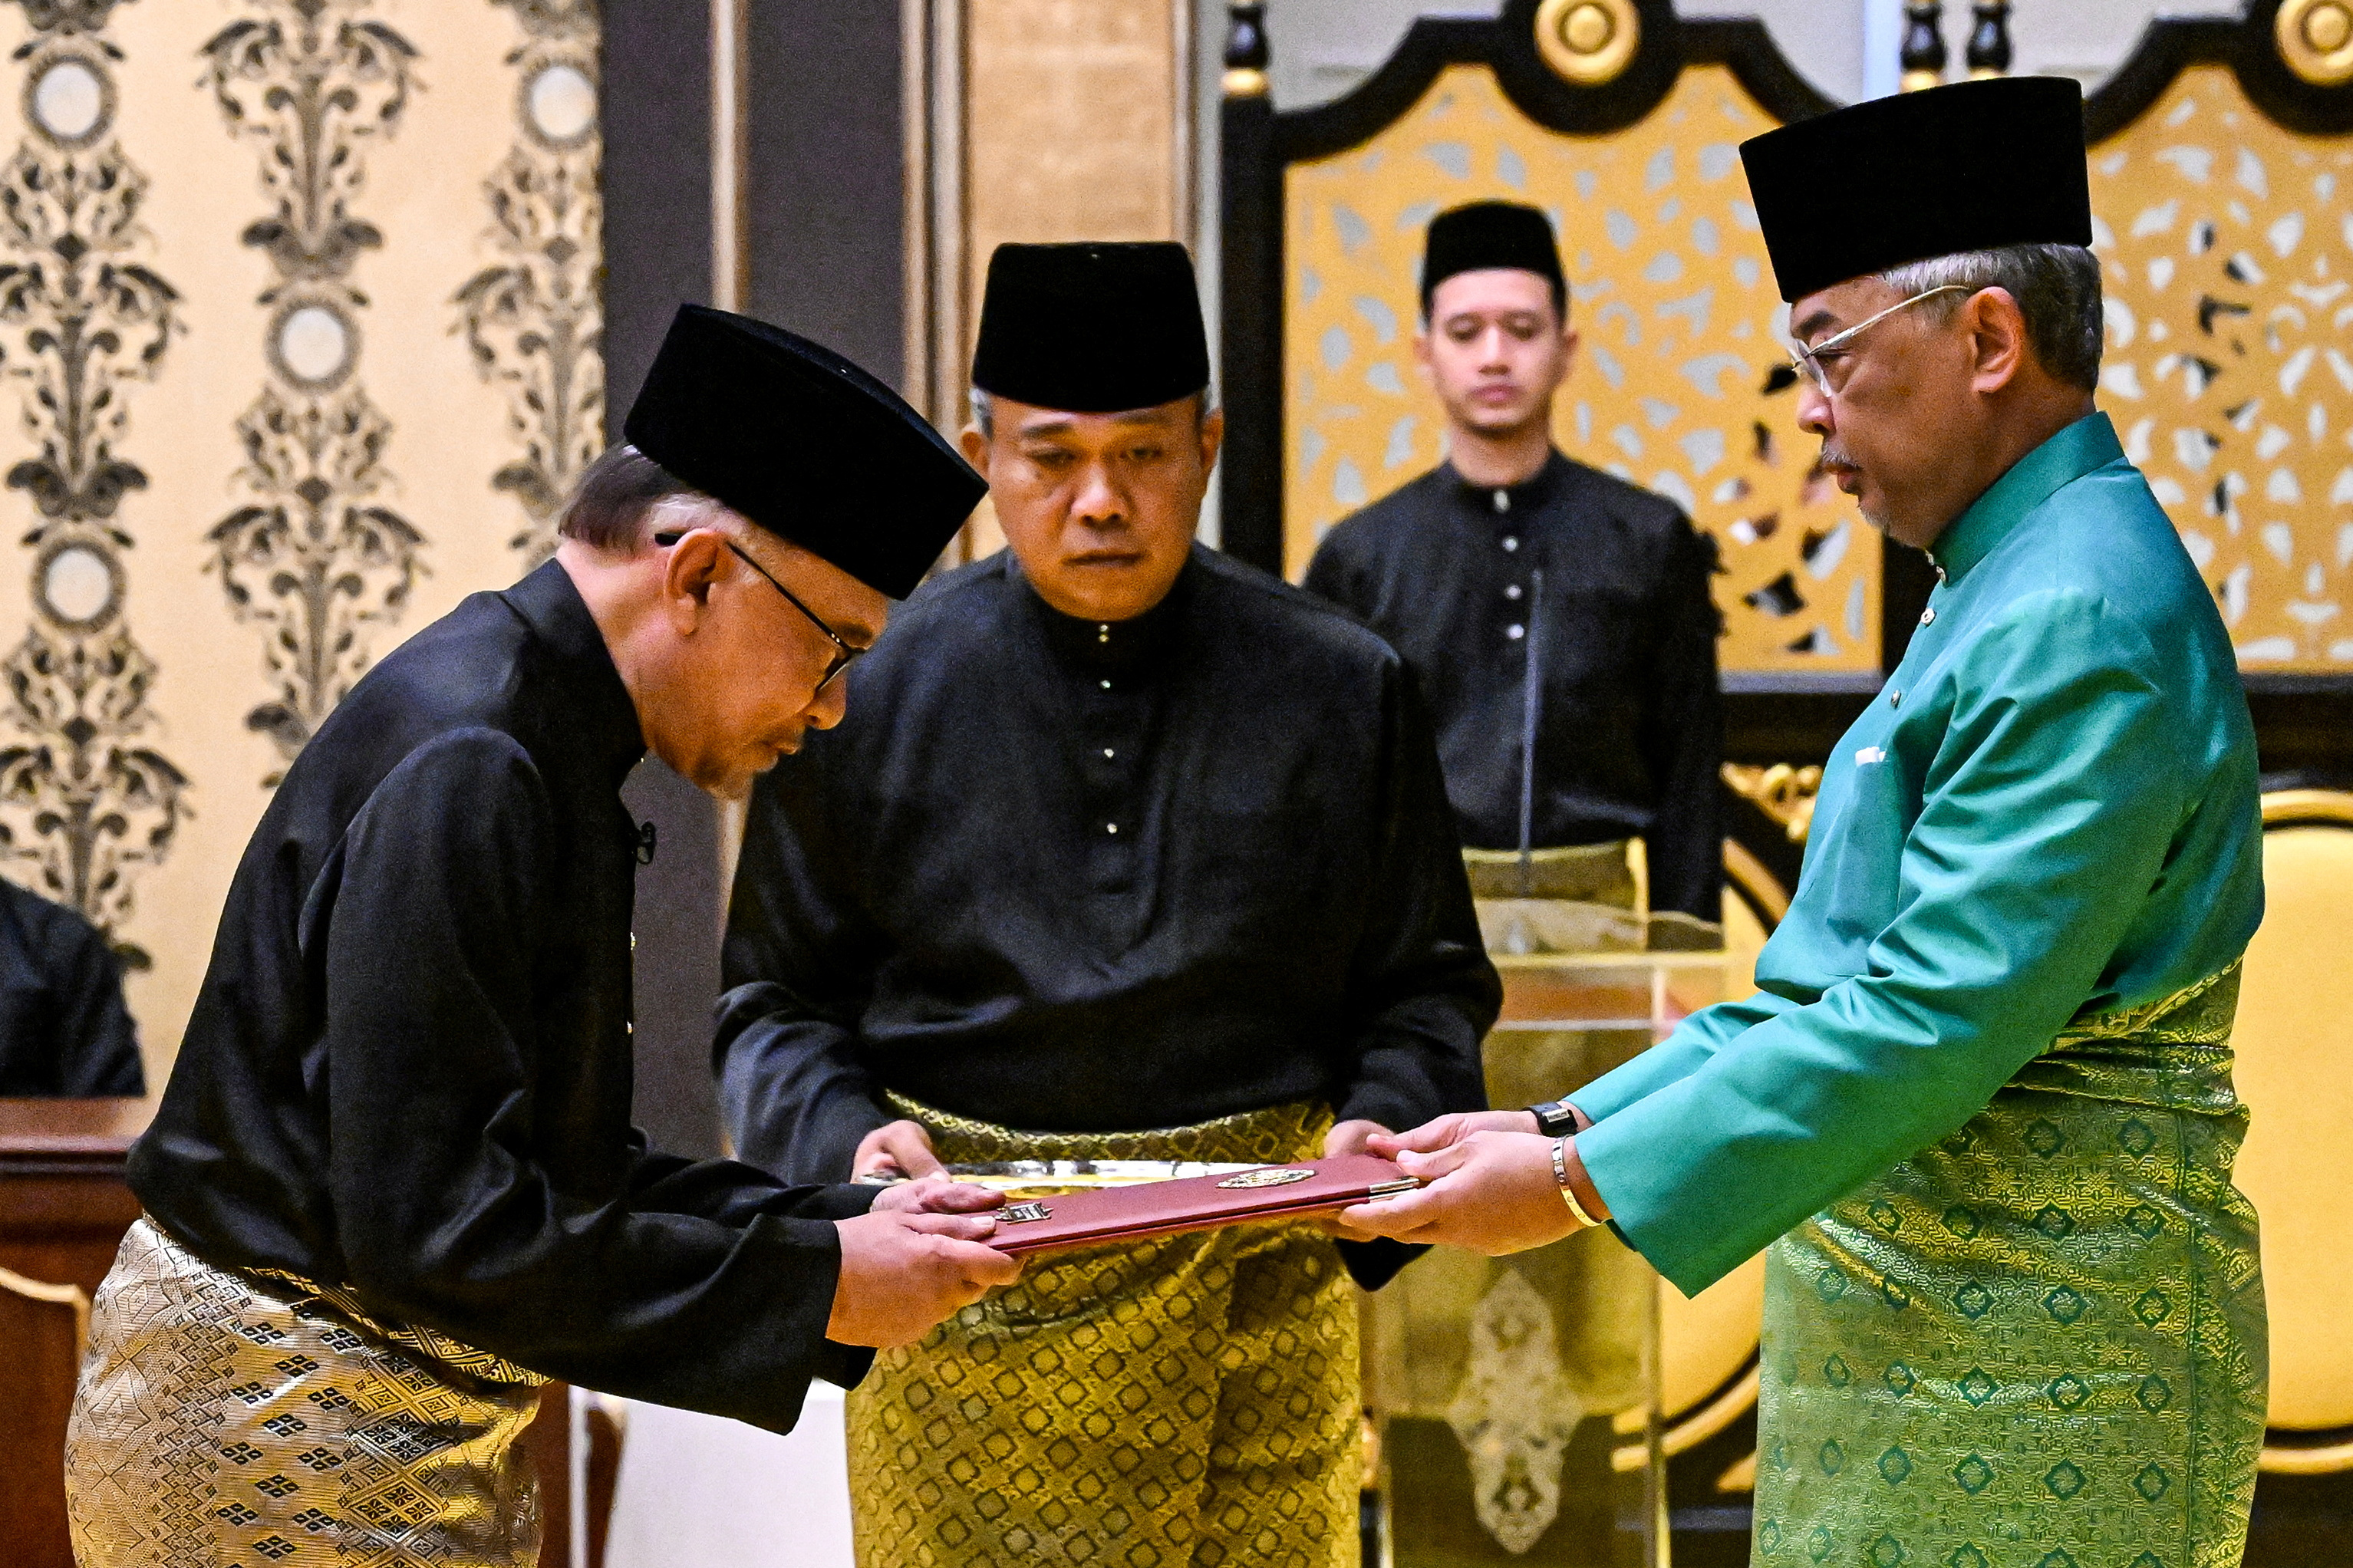 Malaysia's King Sultan Abdullah Sultan Ahmad Shah and newly appointed Malaysian Prime Minister Anwar Ibrahim take part in the swearing-in ceremony at the National Palace in Kuala Lumpur, Malaysia November 24, 2022. Mohd Rasfan/Pool via REUTERS